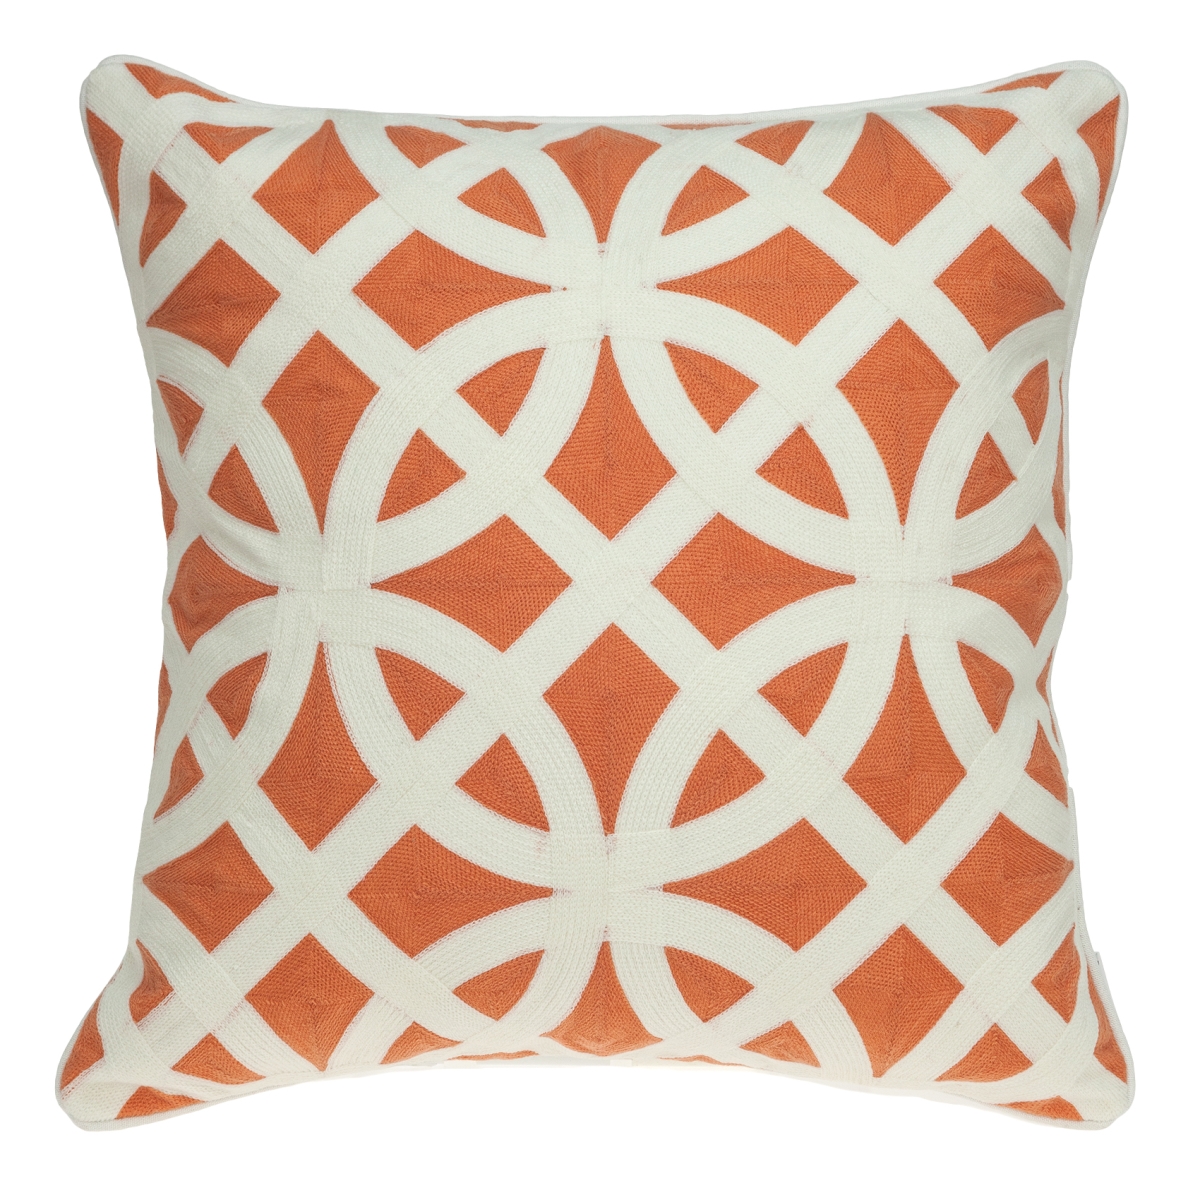 Pila11025d Chano Orange & White Square Transitional Pillow Cover With Down Insert - 20 X 20 X 7 In.